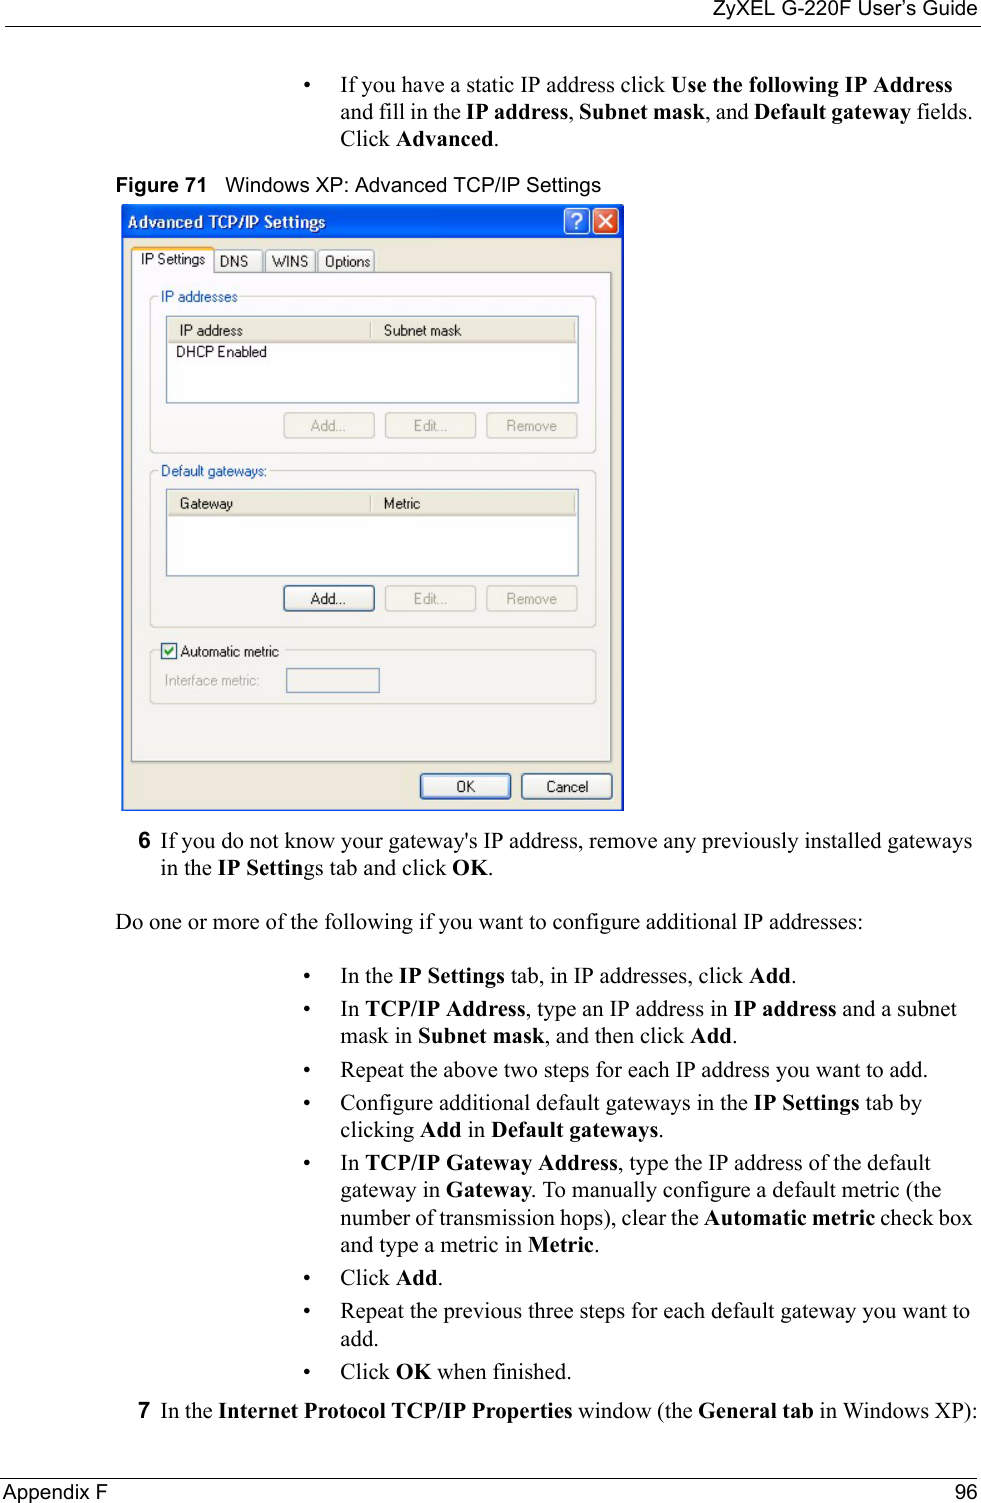 ZyXEL G-220F User’s GuideAppendix F 96• If you have a static IP address click Use the following IP Address and fill in the IP address, Subnet mask, and Default gateway fields. Click Advanced.Figure 71   Windows XP: Advanced TCP/IP Settings6If you do not know your gateway&apos;s IP address, remove any previously installed gateways in the IP Settings tab and click OK.Do one or more of the following if you want to configure additional IP addresses:•In the IP Settings tab, in IP addresses, click Add.•In TCP/IP Address, type an IP address in IP address and a subnet mask in Subnet mask, and then click Add.• Repeat the above two steps for each IP address you want to add.• Configure additional default gateways in the IP Settings tab by clicking Add in Default gateways.•In TCP/IP Gateway Address, type the IP address of the default gateway in Gateway. To manually configure a default metric (the number of transmission hops), clear the Automatic metric check box and type a metric in Metric.• Click Add. • Repeat the previous three steps for each default gateway you want to add.• Click OK when finished.7In the Internet Protocol TCP/IP Properties window (the General tab in Windows XP):